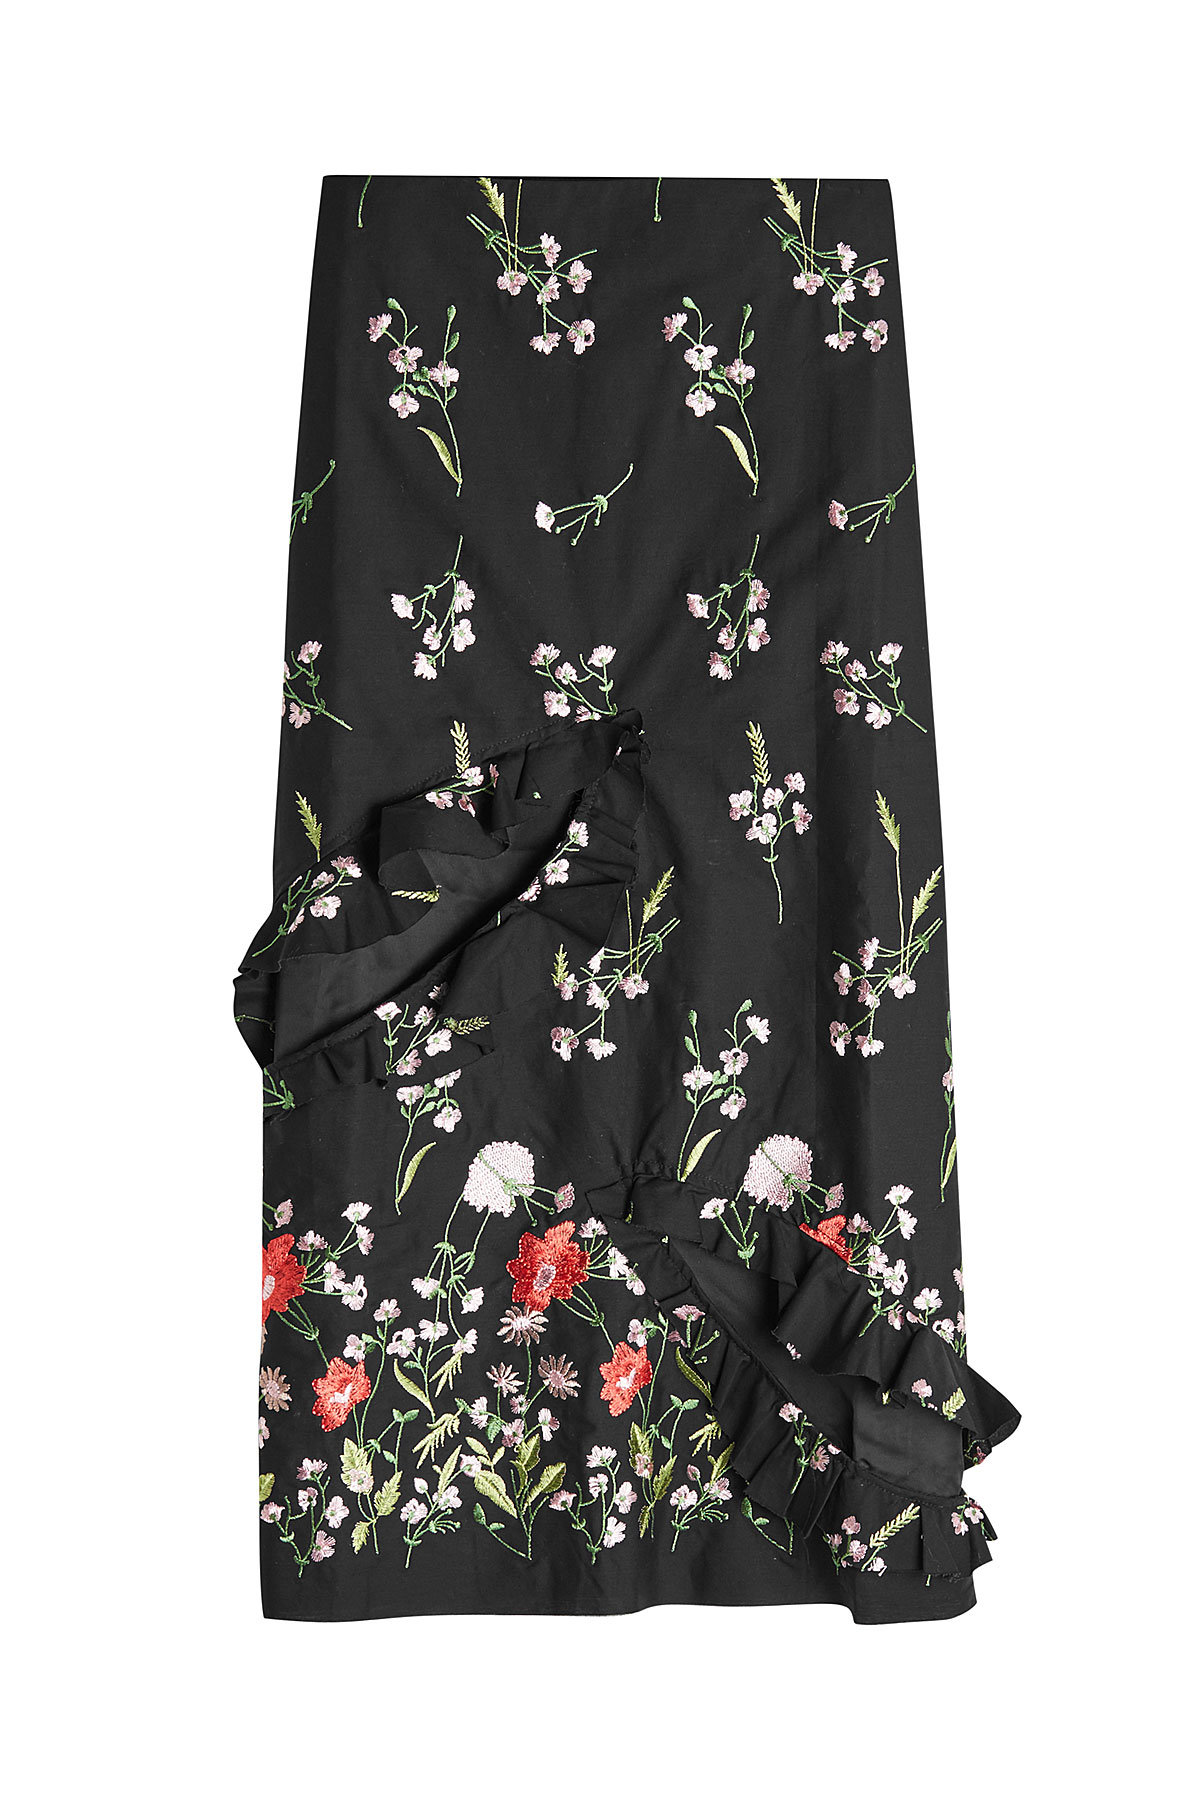 Marques' Almeida - Embroidered Slip Skirt with Cut-Out Front